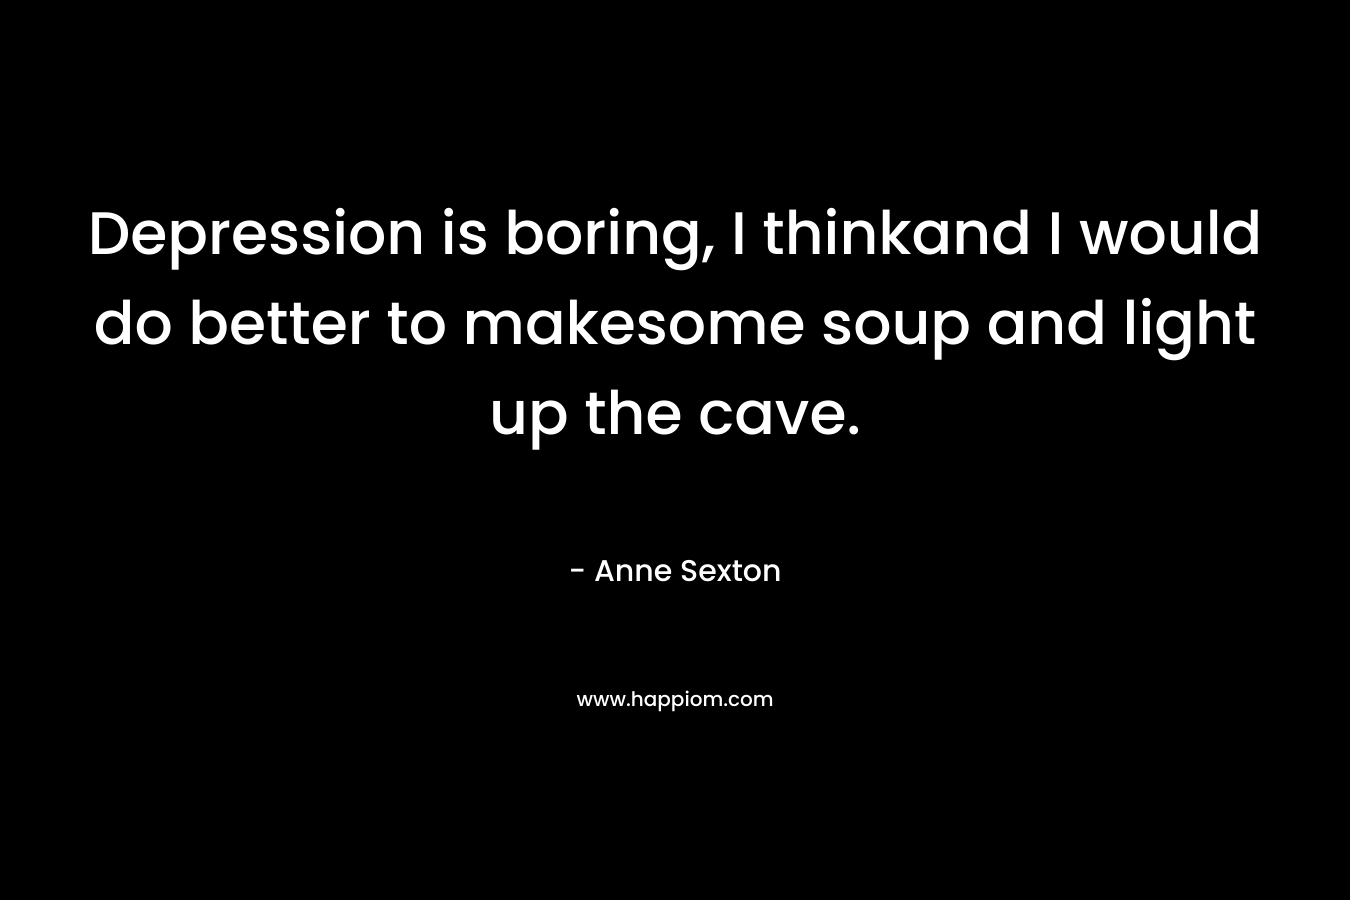 Depression is boring, I thinkand I would do better to makesome soup and light up the cave. – Anne Sexton